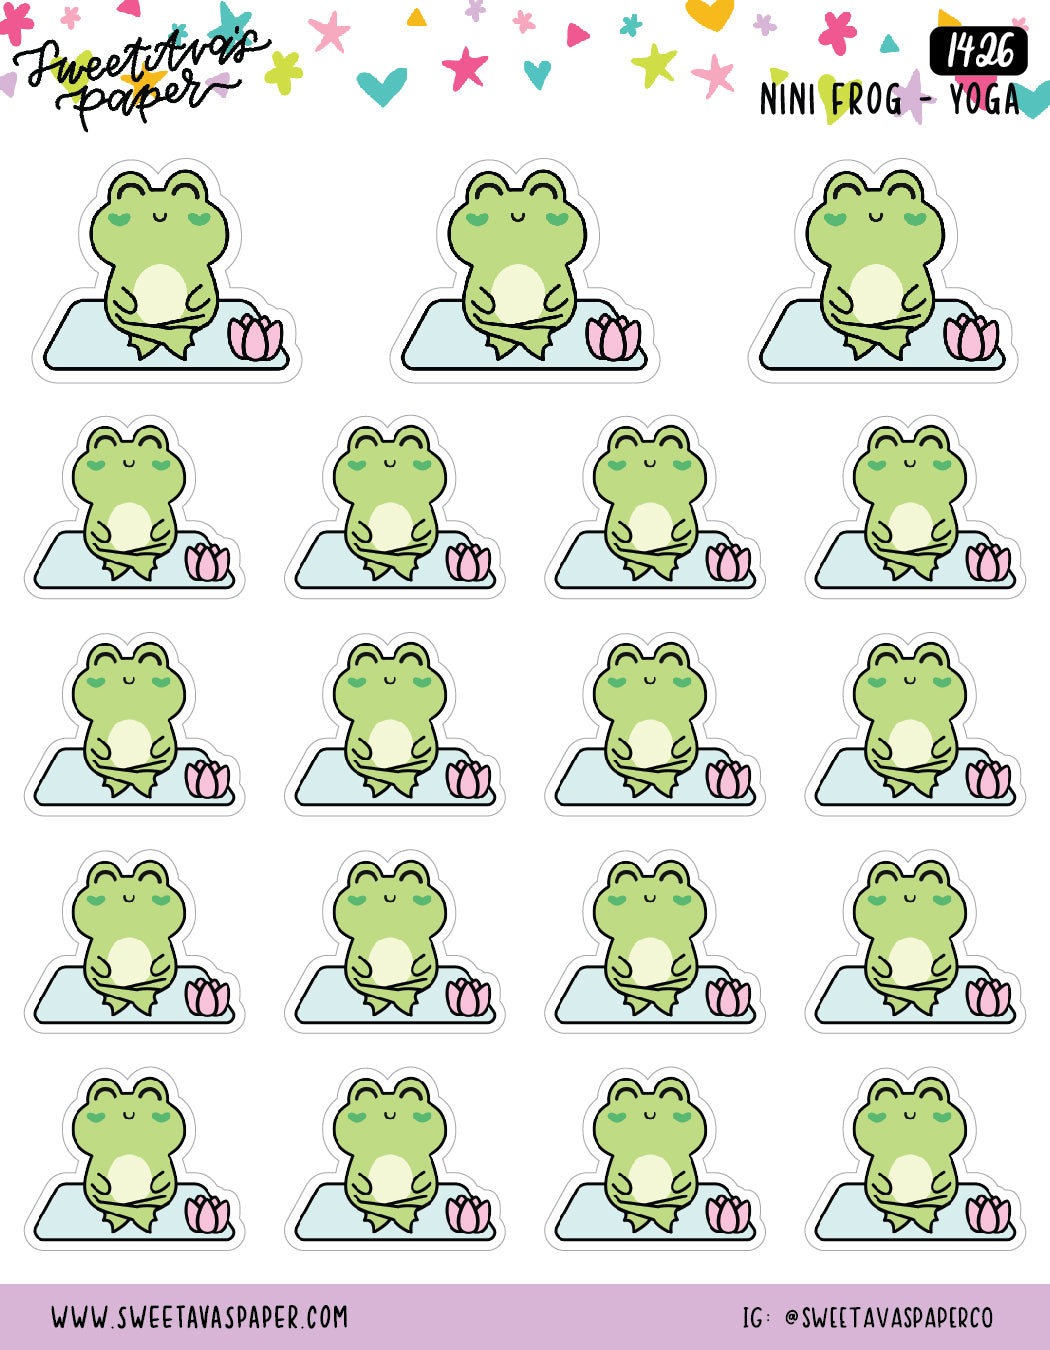 Yoga Planner Stickers - Meditation Planner Stickers - Character Planner Stickers - Nini Frog - [1426]